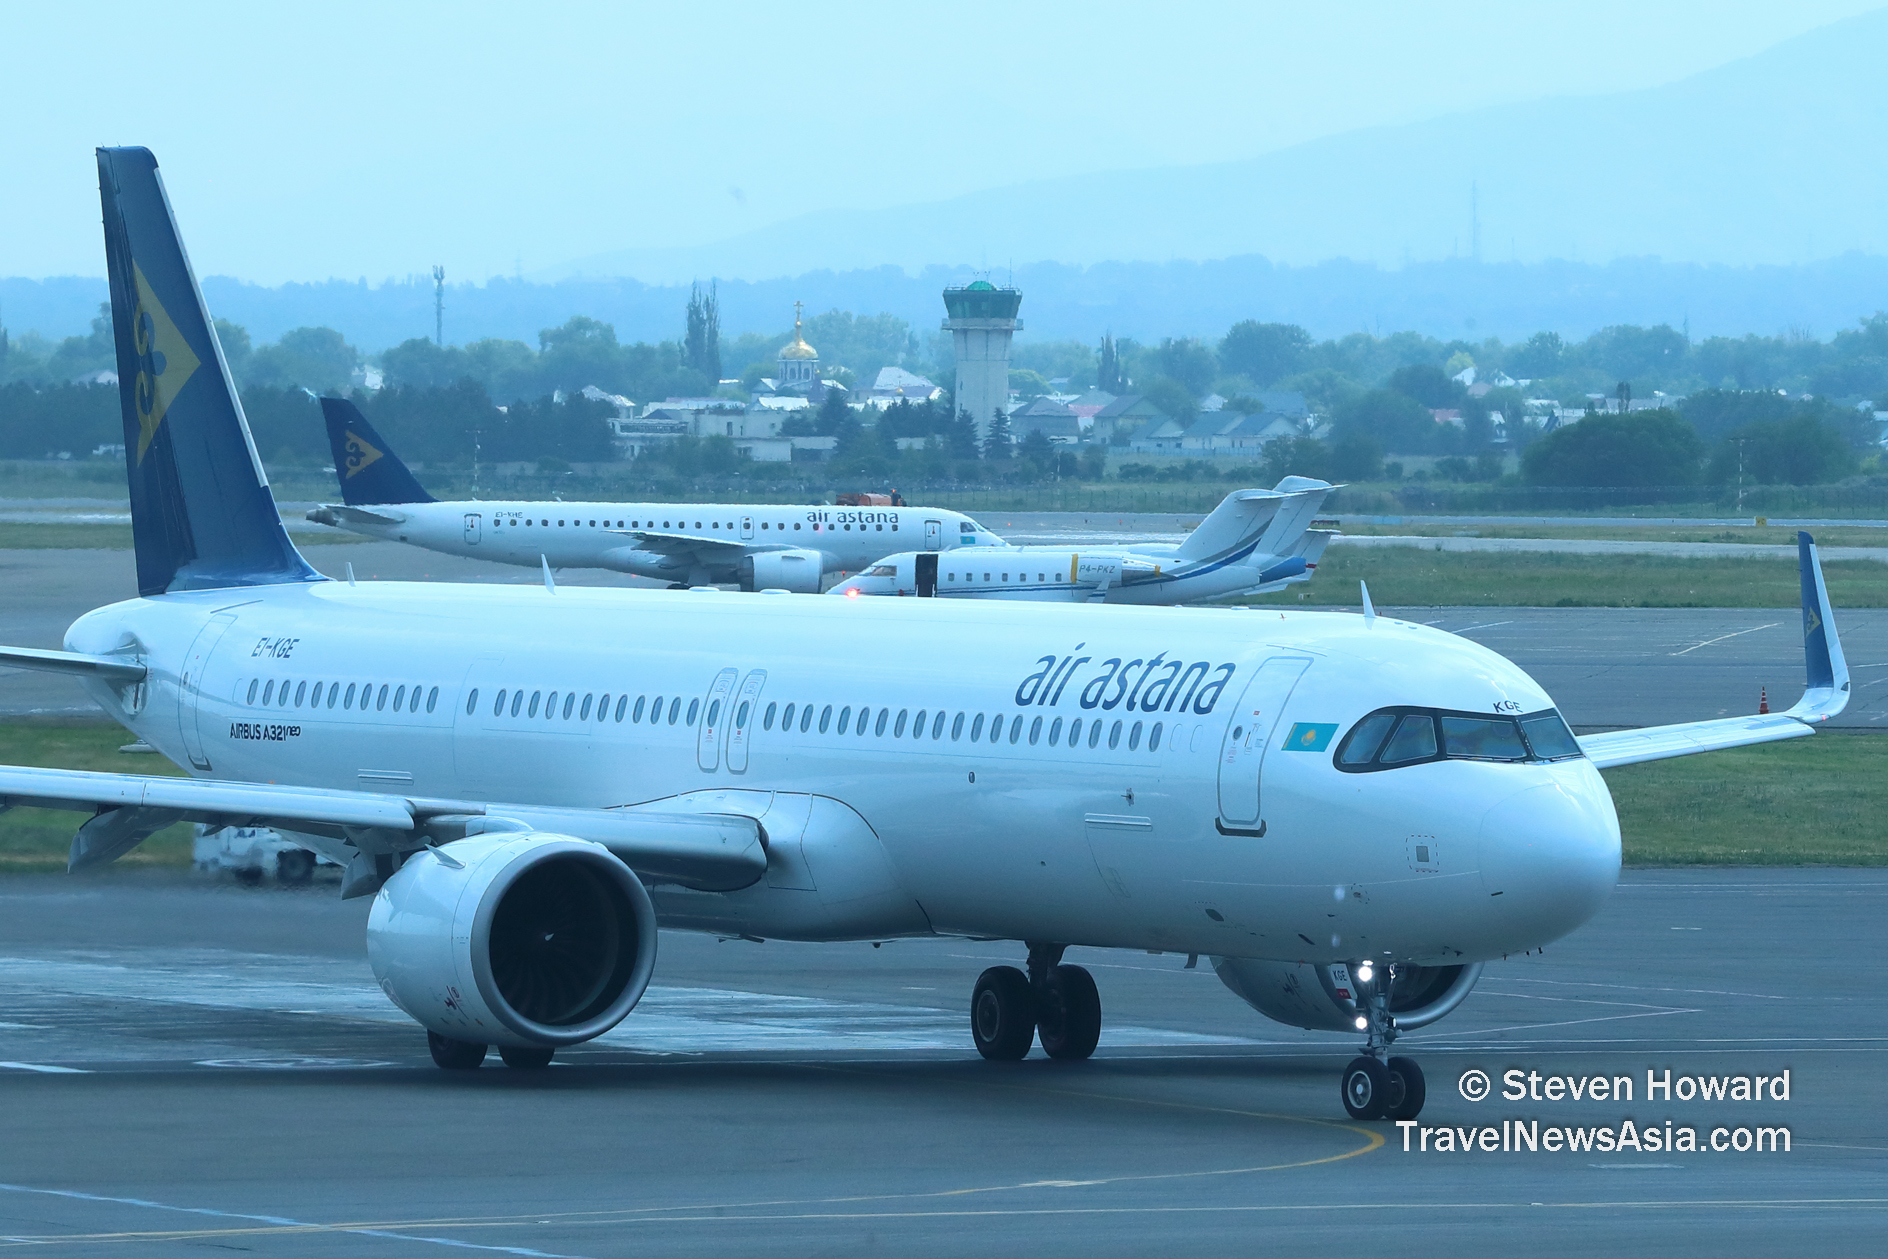 Air Astana A321neo. Picture by Steven Howard of TravelNewsAsia.com Click to enlarge.